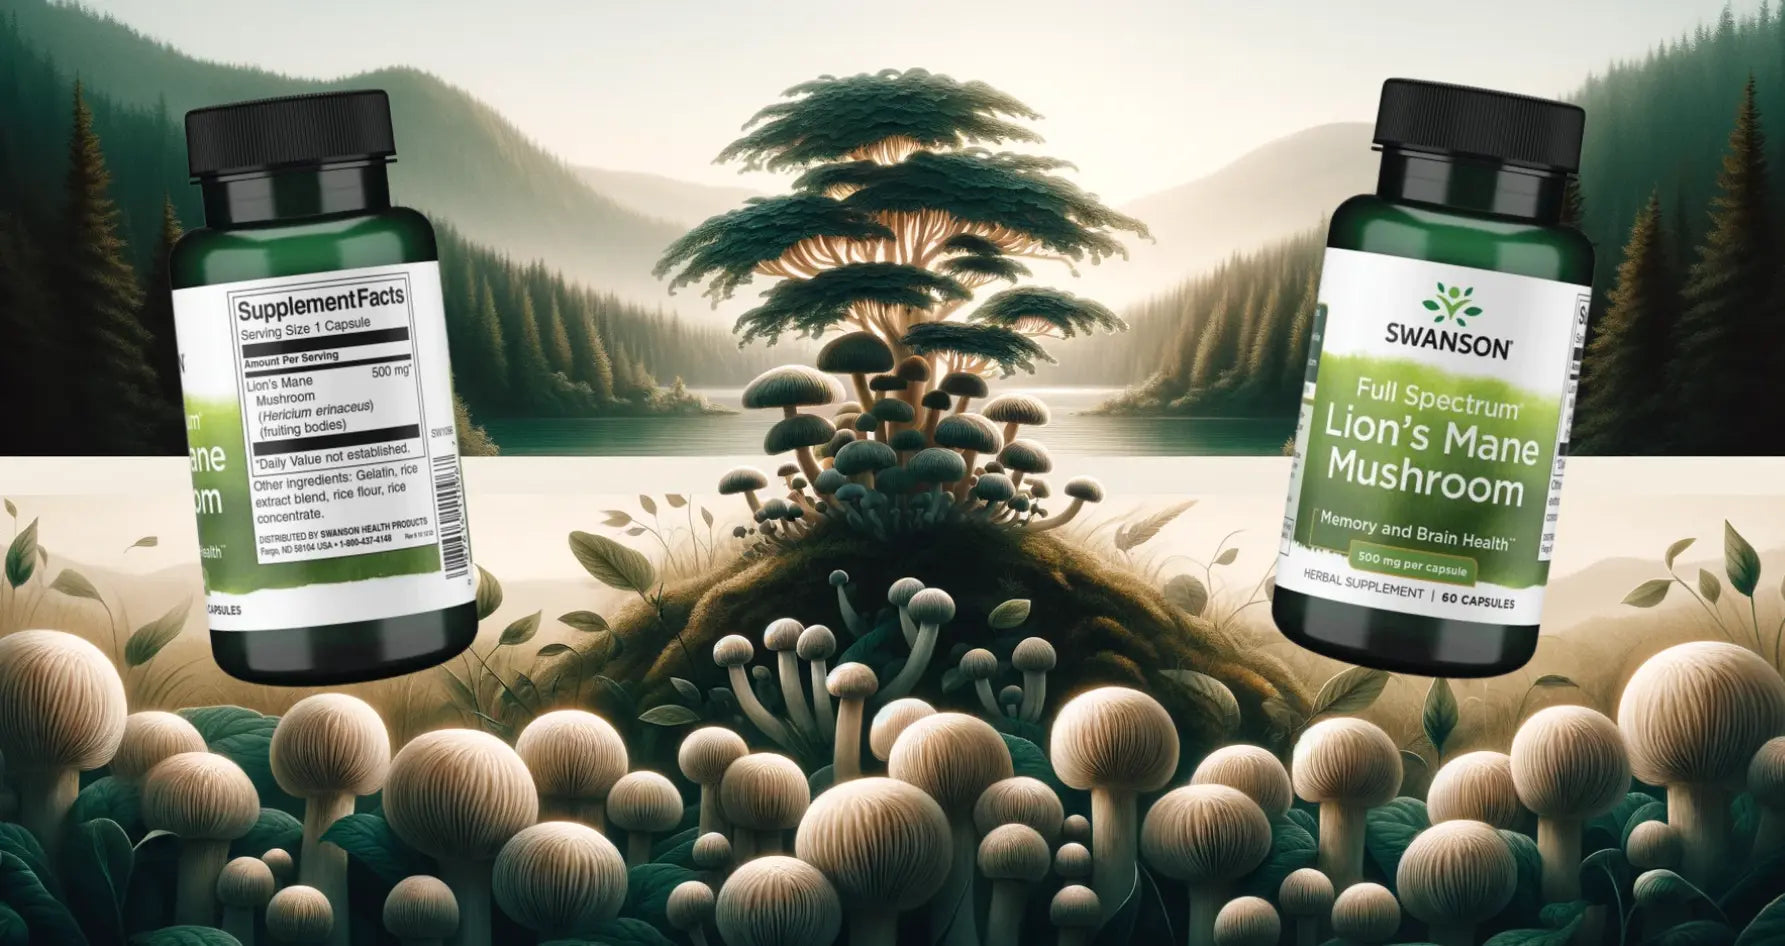 Serene natural landscape showcasing Lion's Mane mushrooms in their natural habitat, symbolizing holistic health and wellbeing with a tranquil green and earthy color palette.